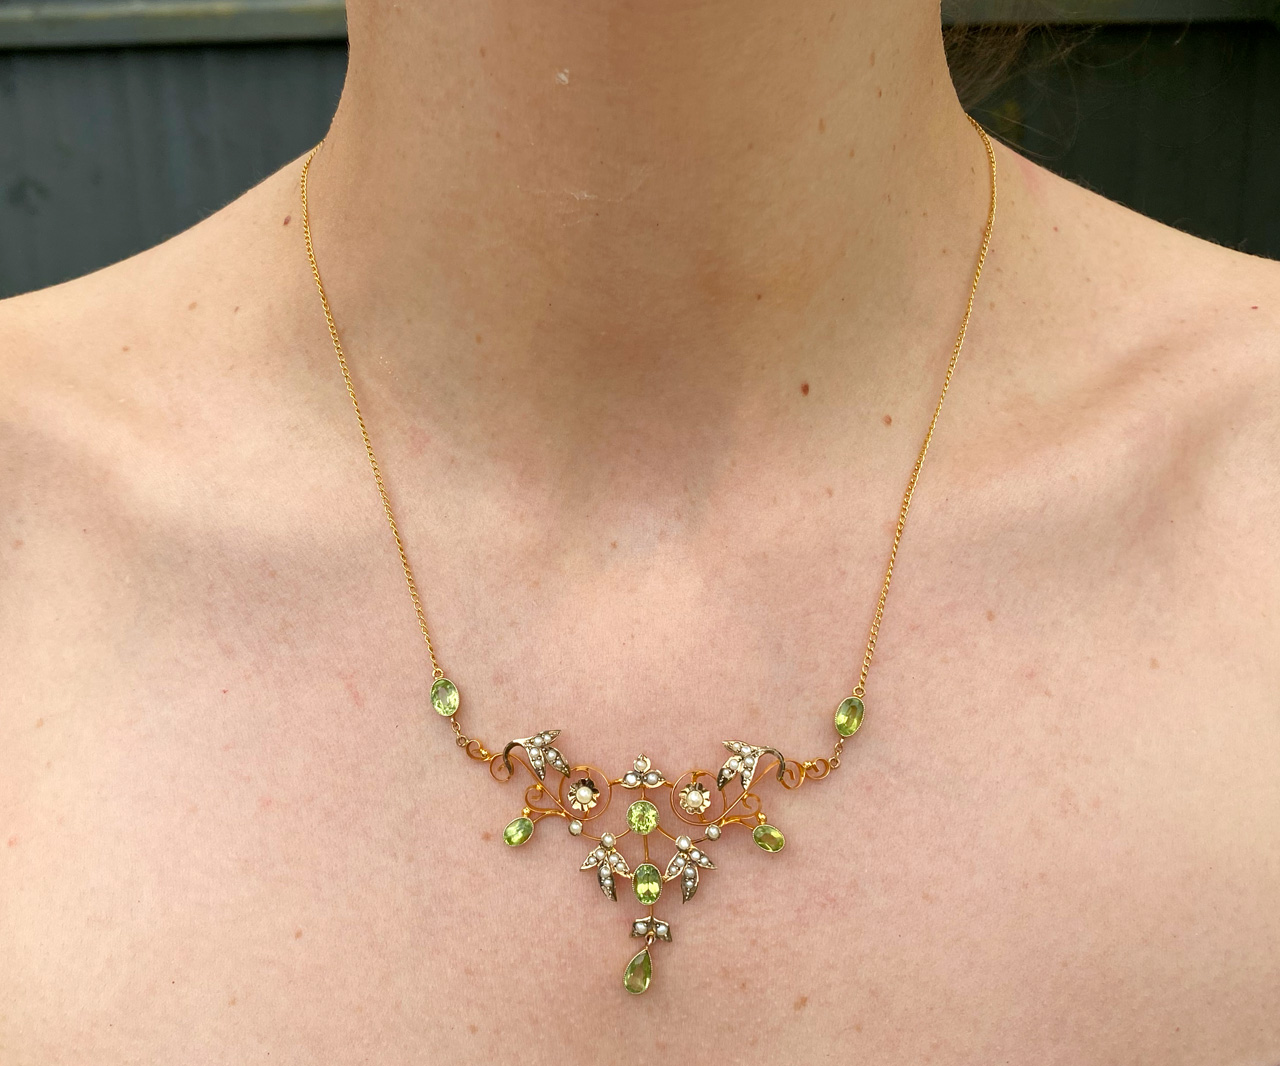 Buy Peridot and Pearl Necklace, Peridot Nugget Bead Necklace, Peridot  Jewelry, Green Stone Necklace, Boho Jewelry, Handmade Jewelry Online in  India - Etsy